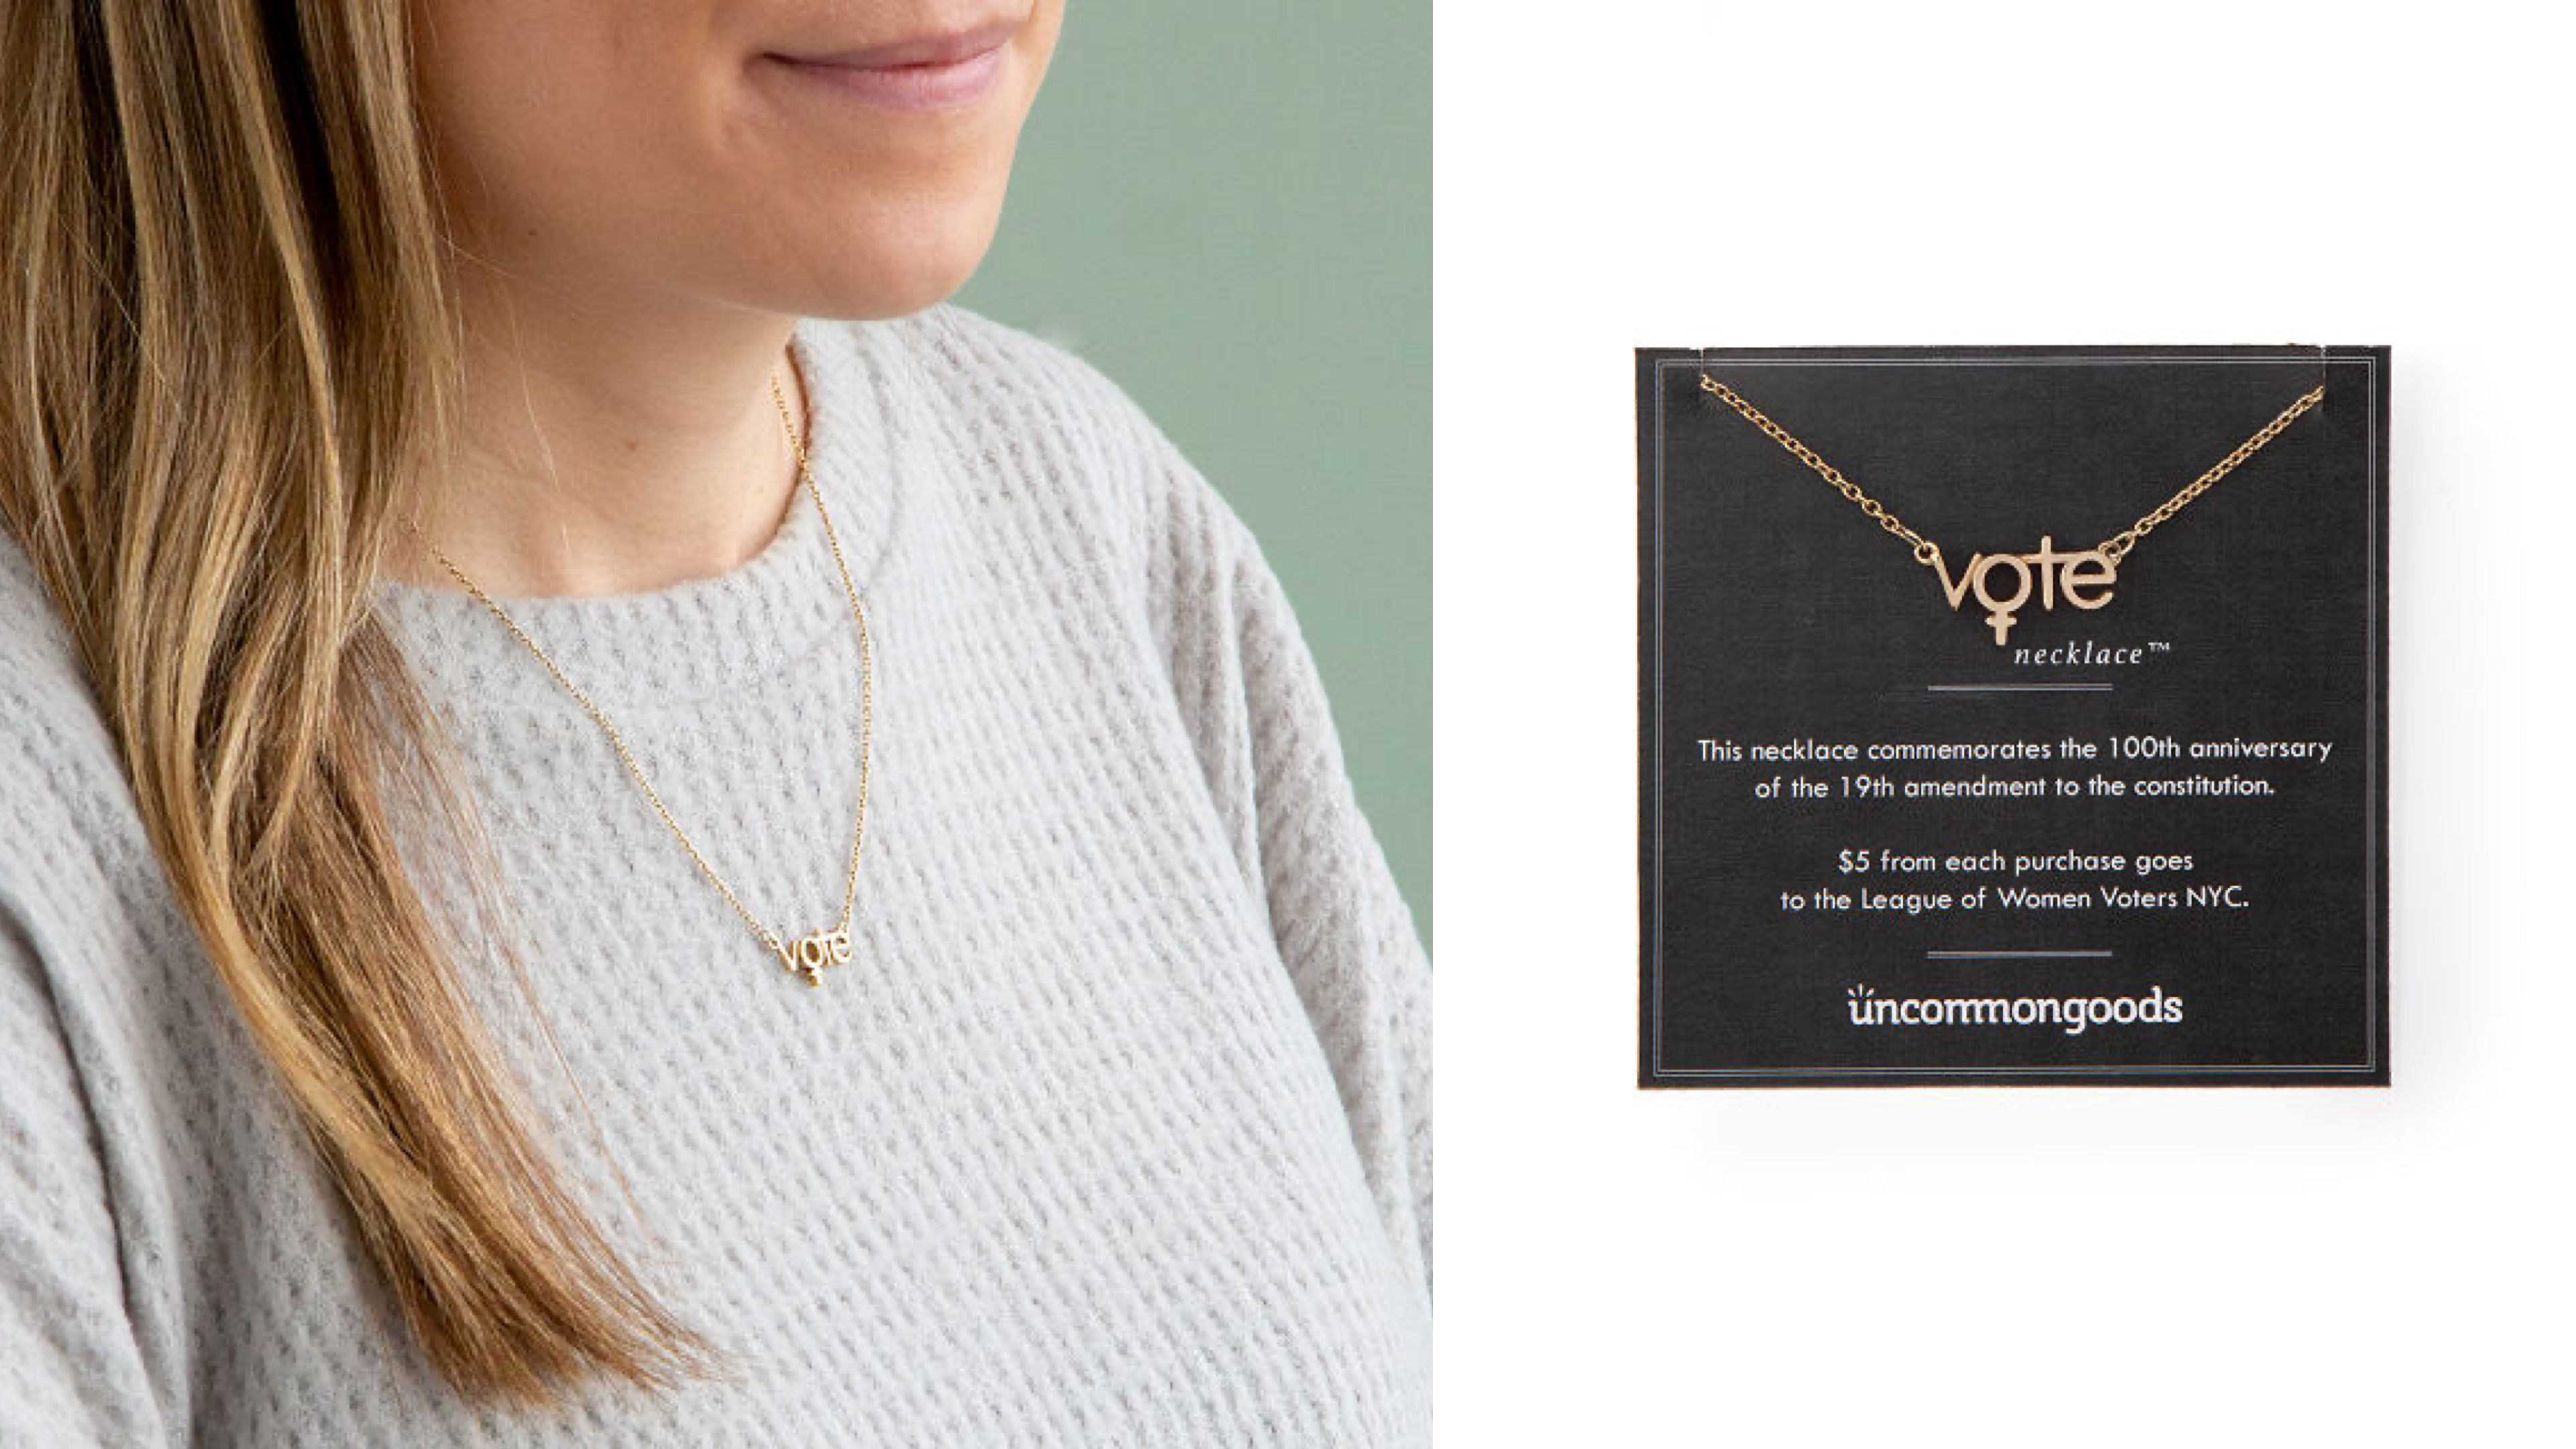 vote necklace honoring women's suffrage